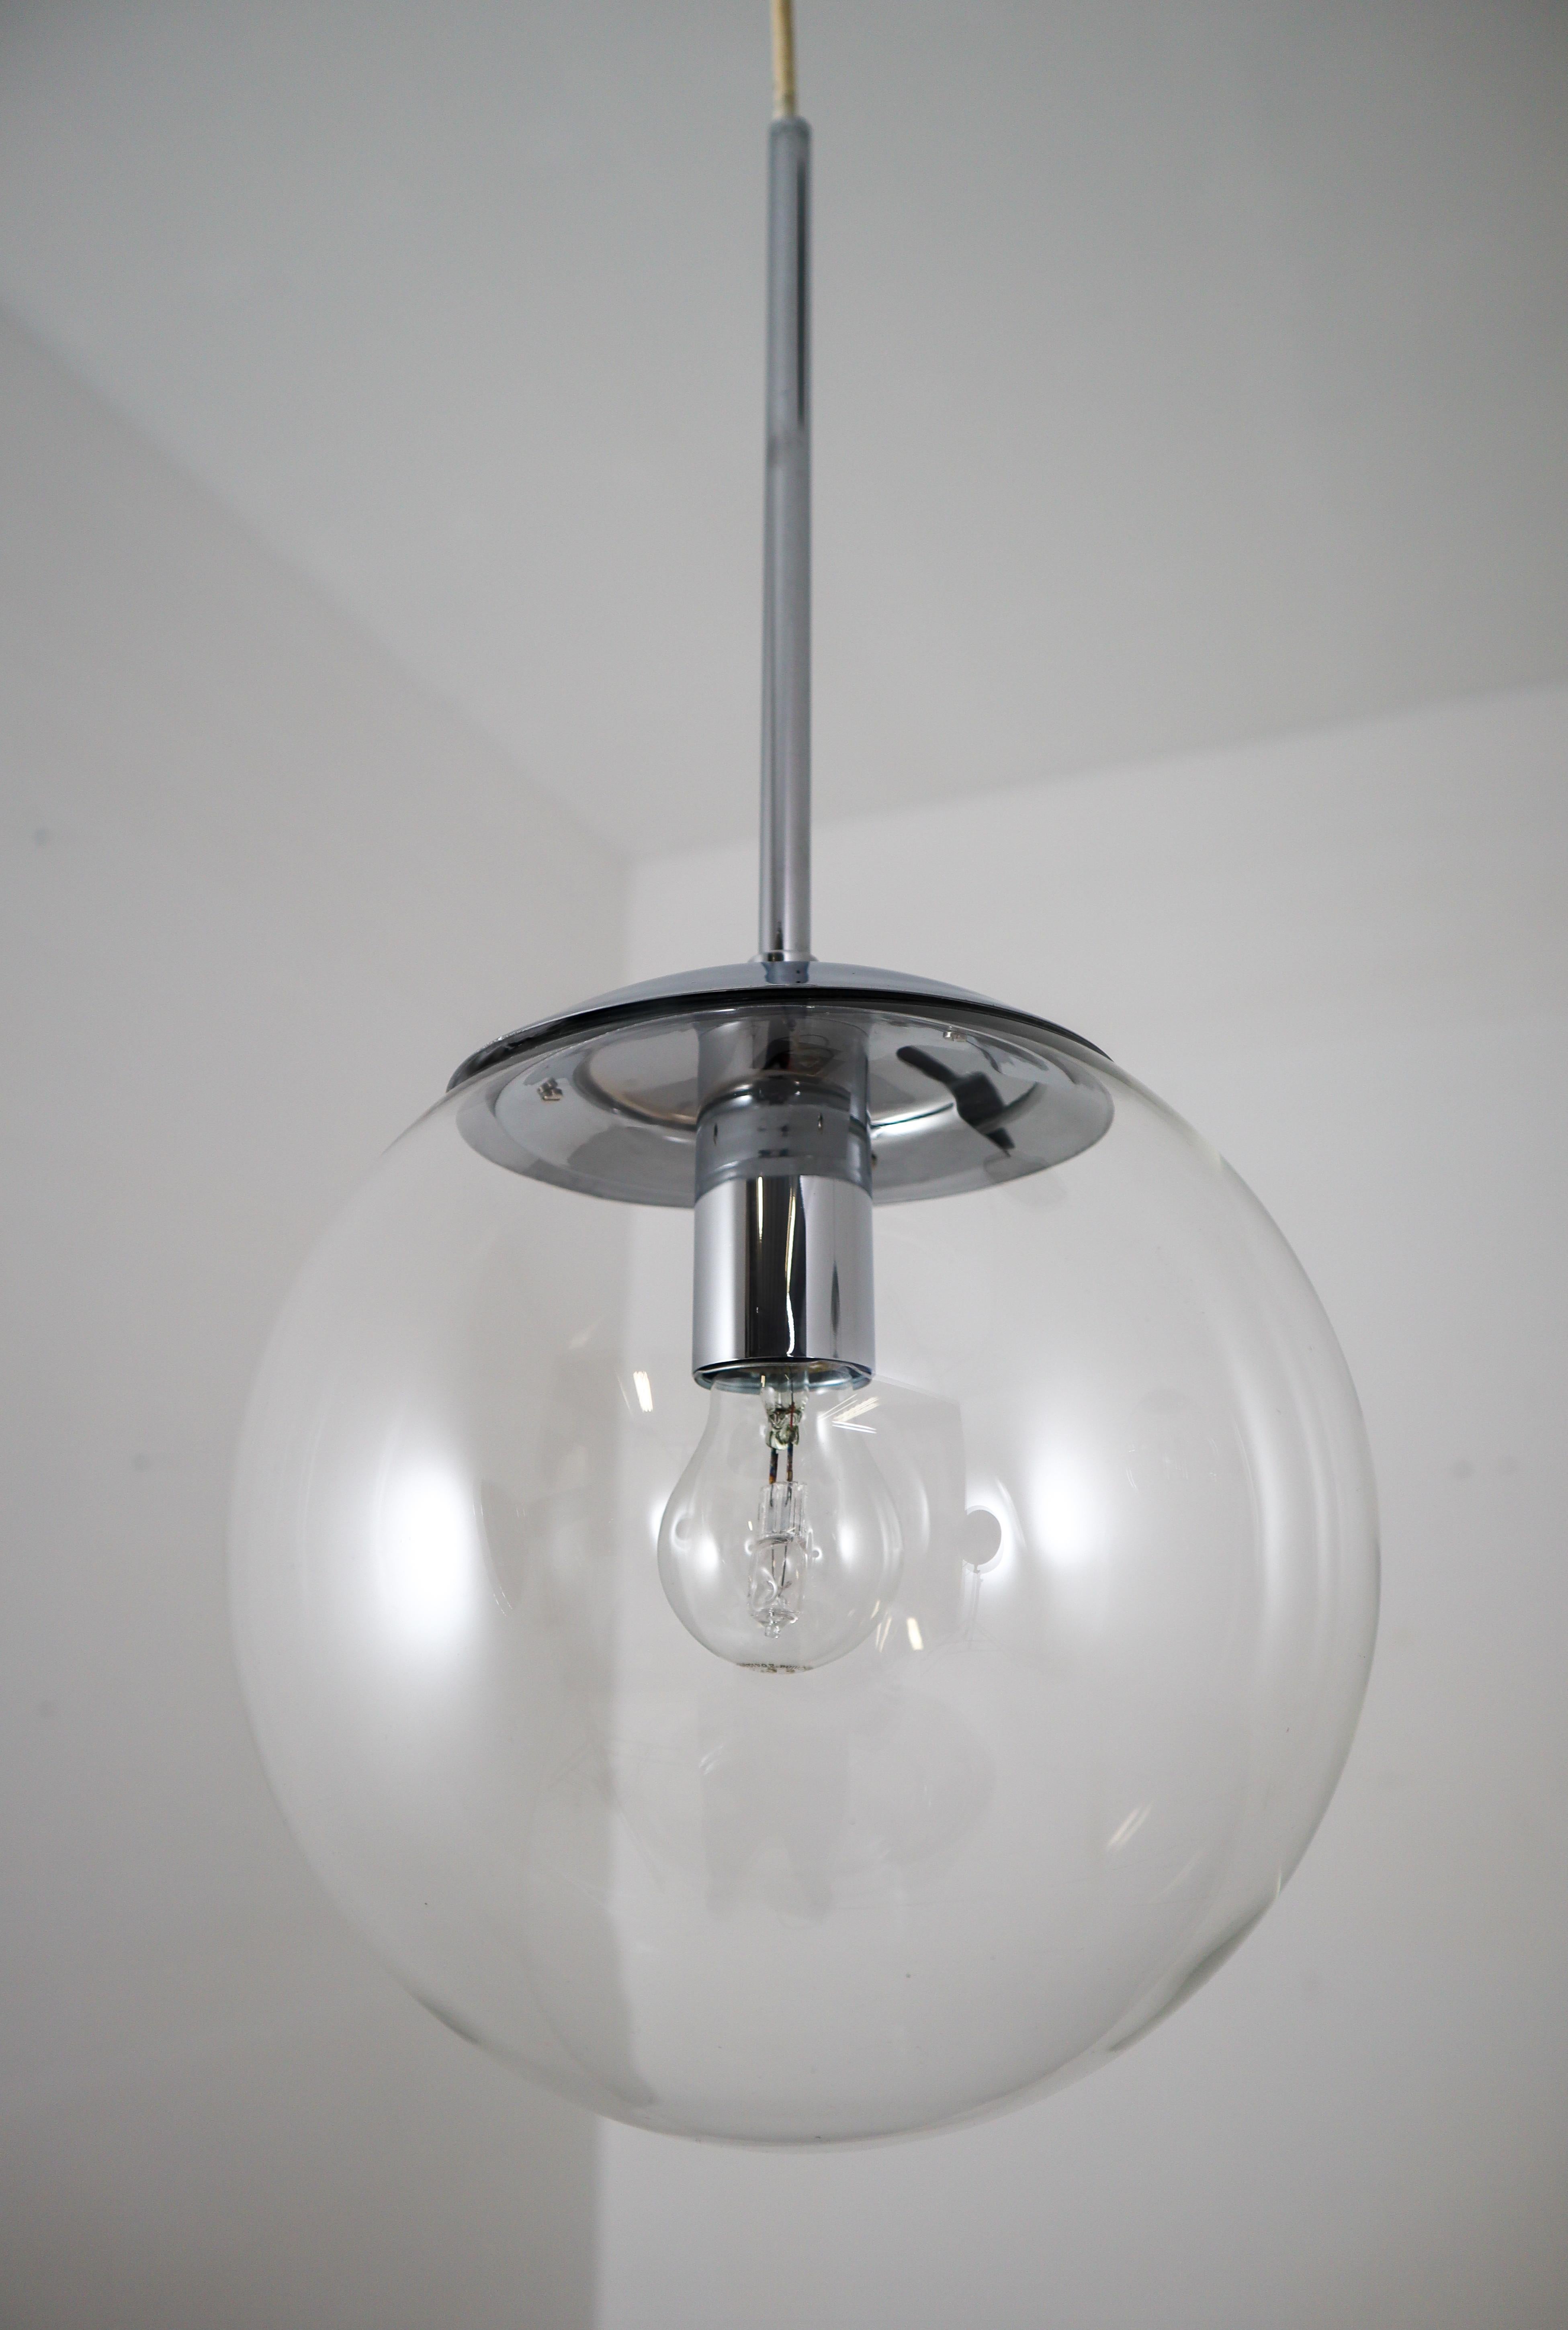 Hand blown pendant lamps were made by the German manufacturer Limburg Glashütte in the 1970s. The hand blown glass globes are mounted on a chrome base. Heavy quality and in very good condition. The pleasant light spreads very atmospheric, this